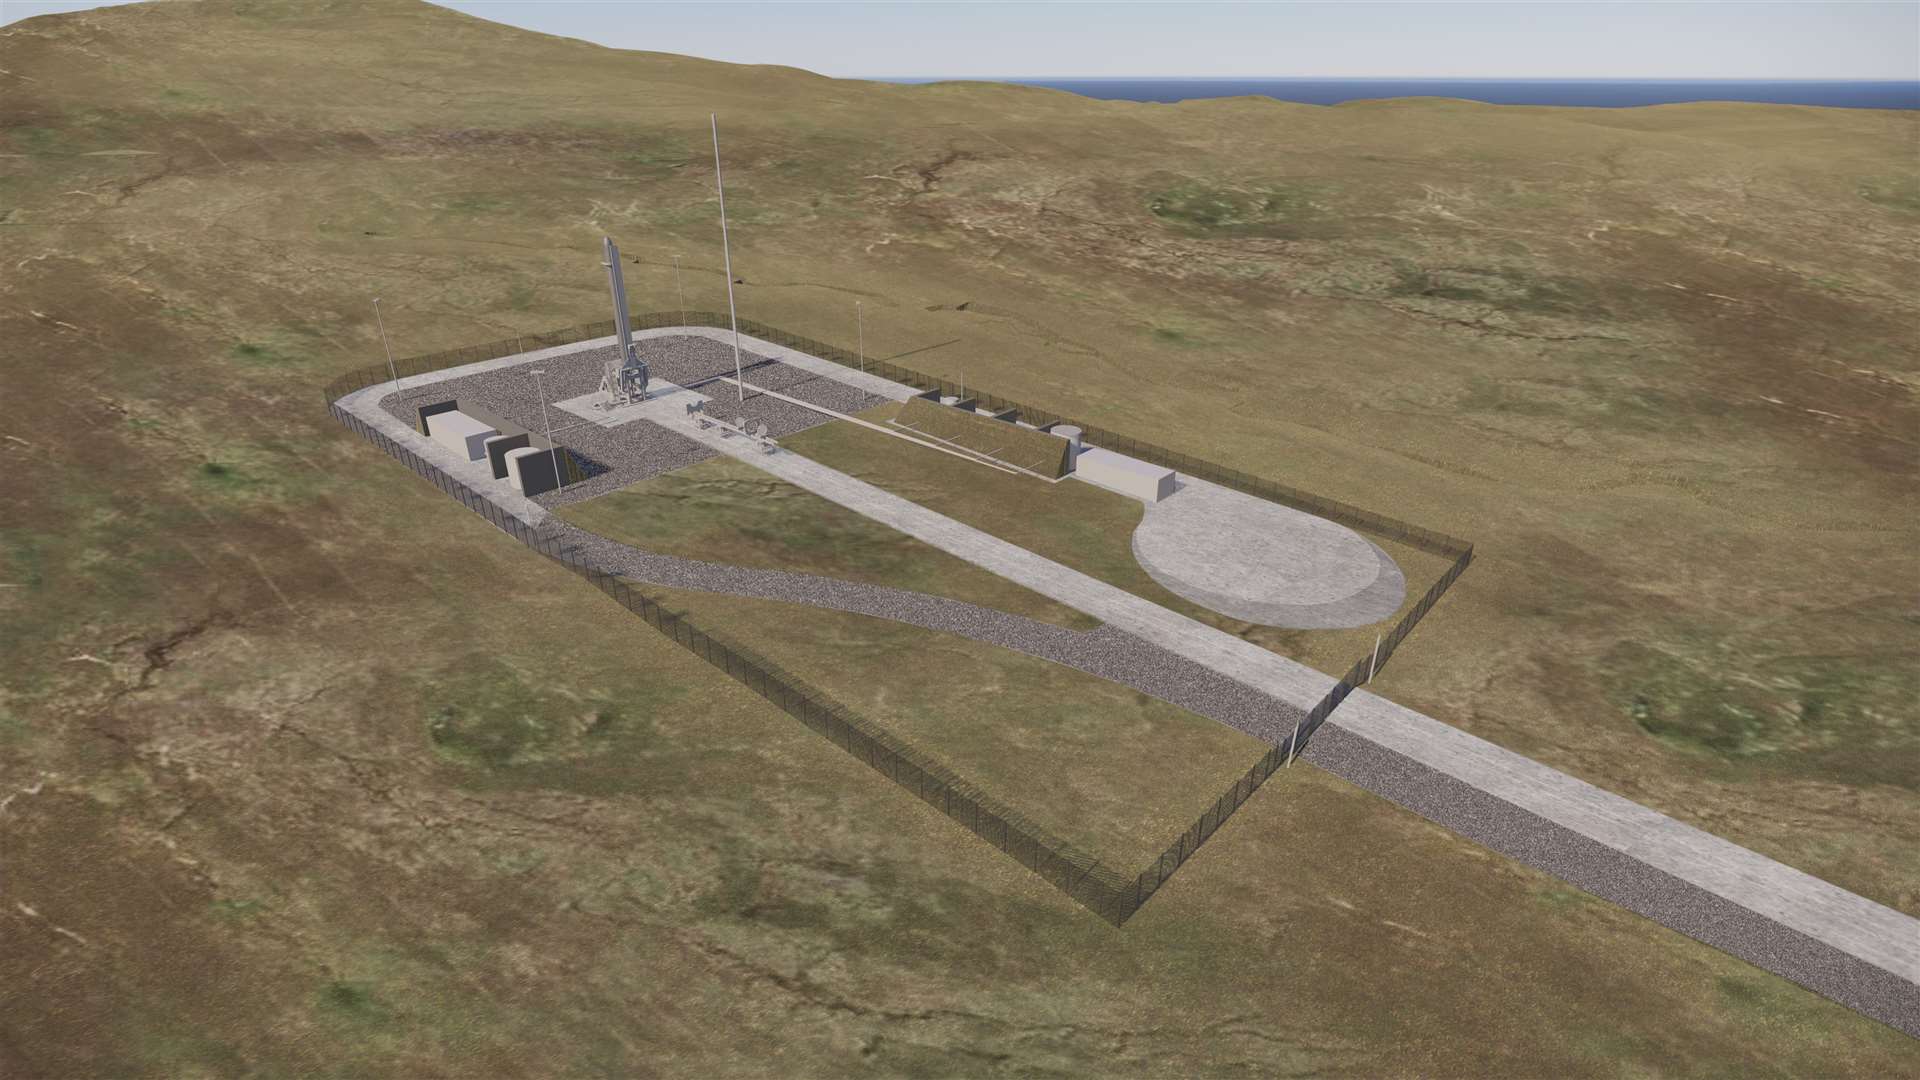 Changes are being proposed to the layout of Sutherland Spaceport.